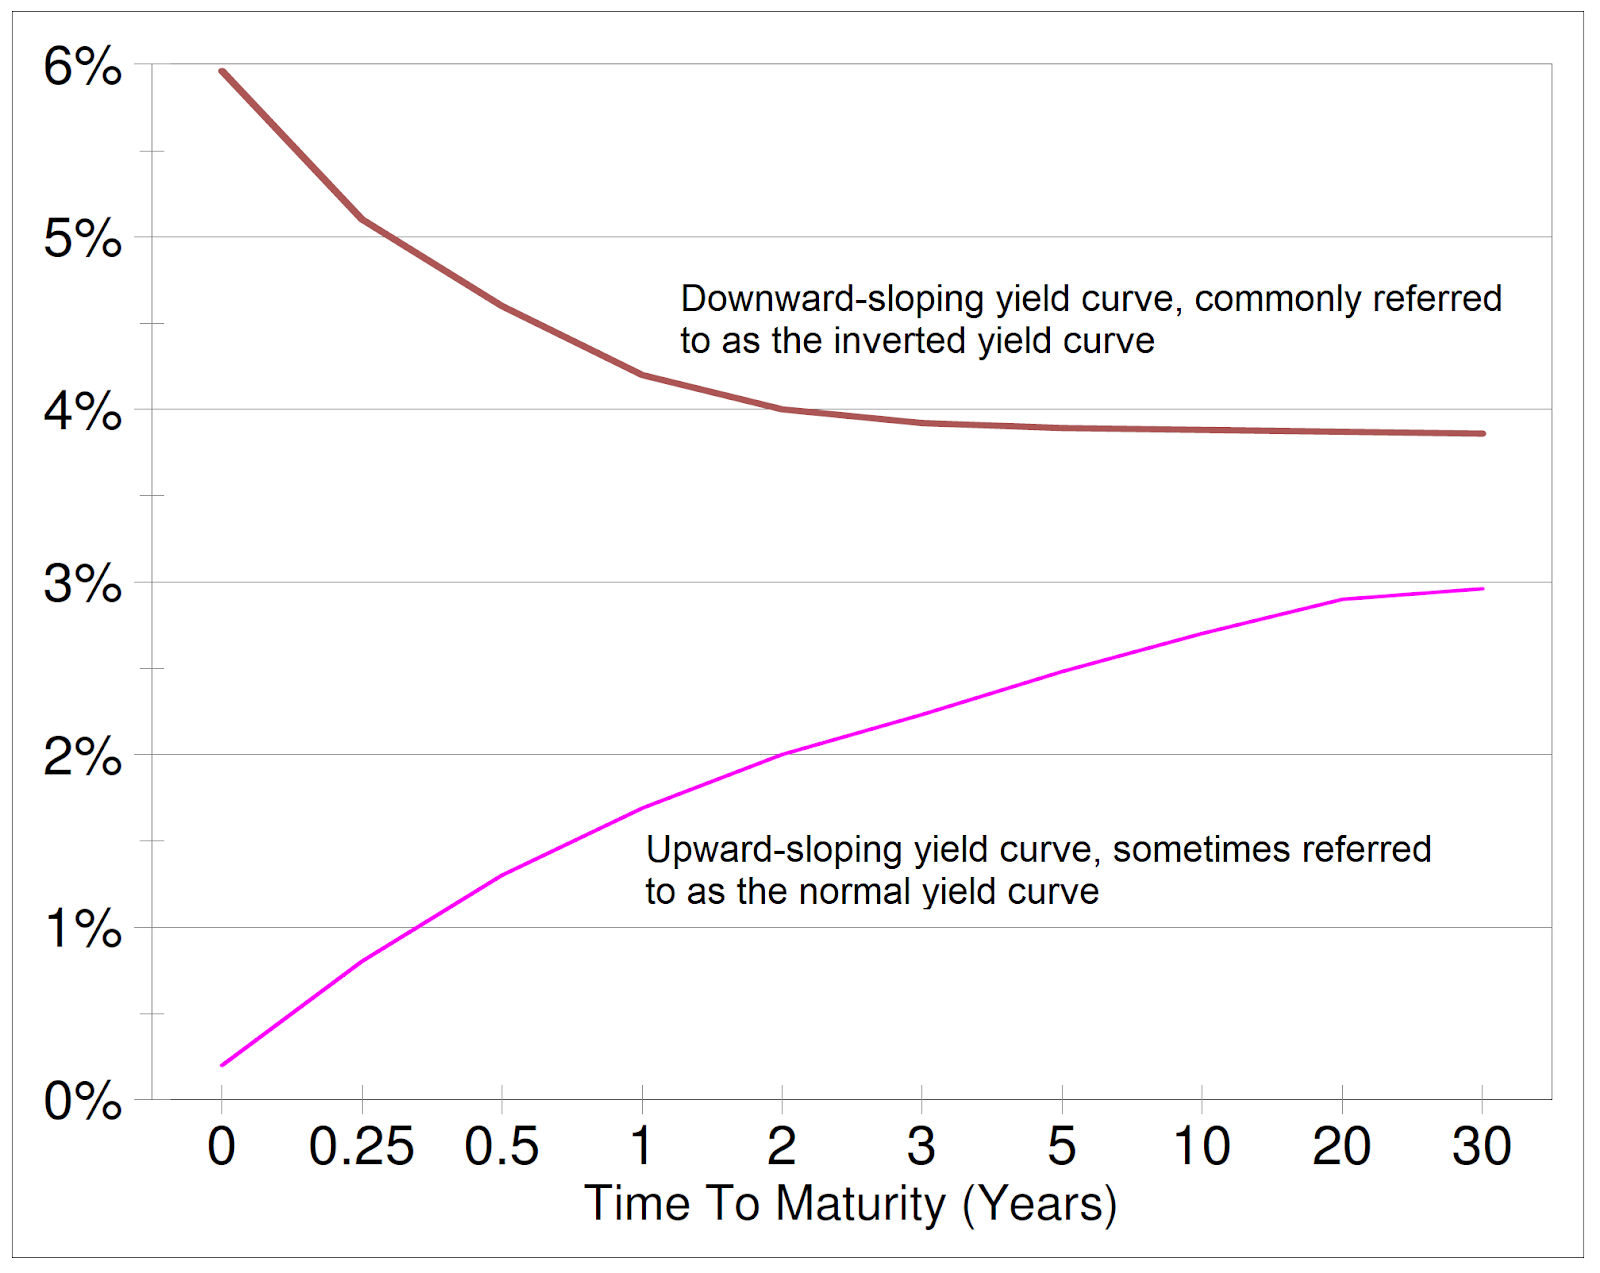 Normal upward-sloping yield curve and an atypical downward-sloping yield curve